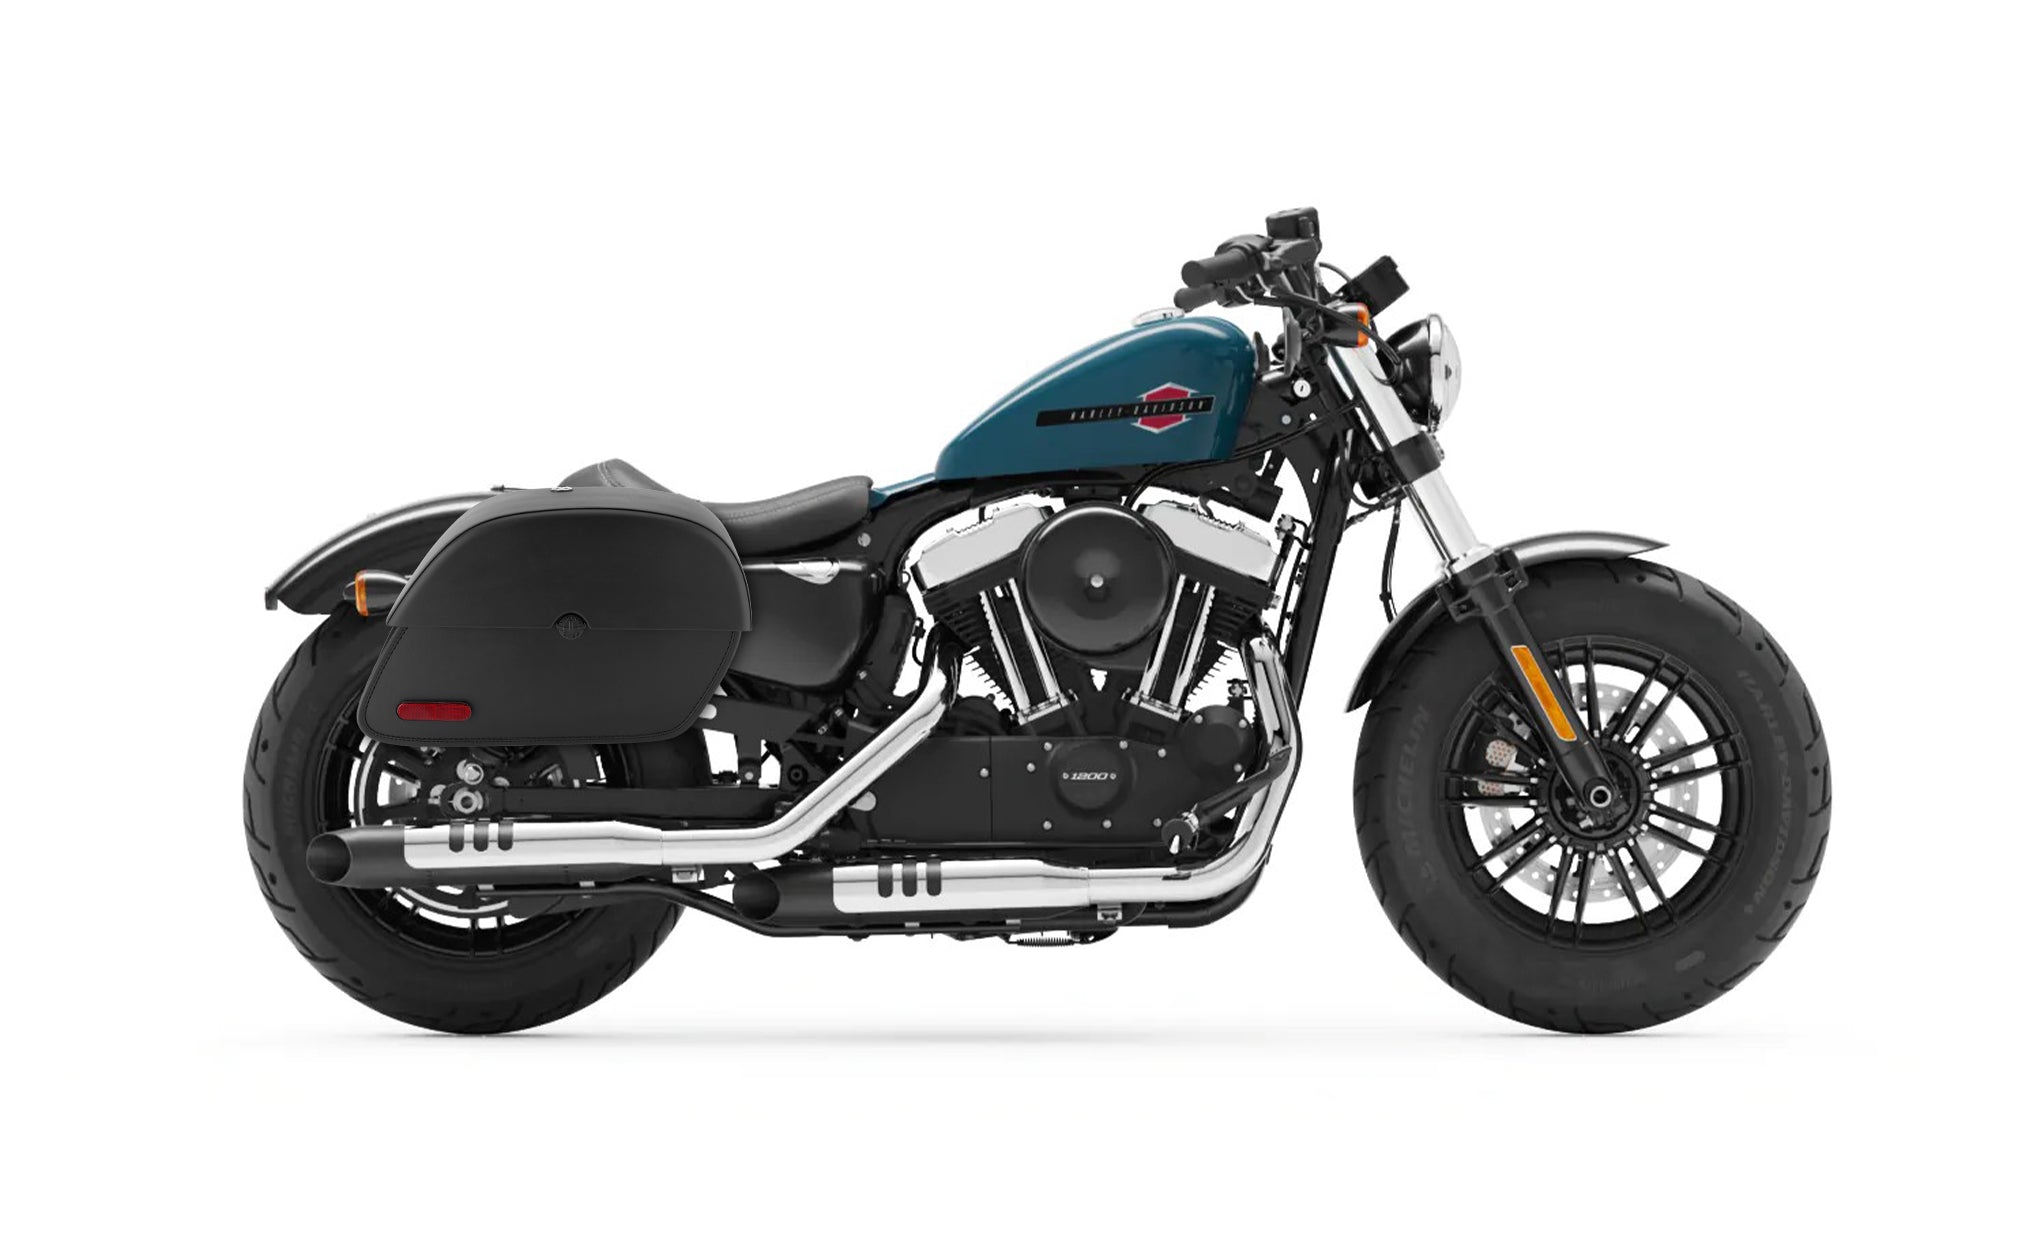 28L - Panzer Medium Quick Mount Leather Saddlebags For Harley Sportster Forty Eight XL1200X/XL1200XS @expand